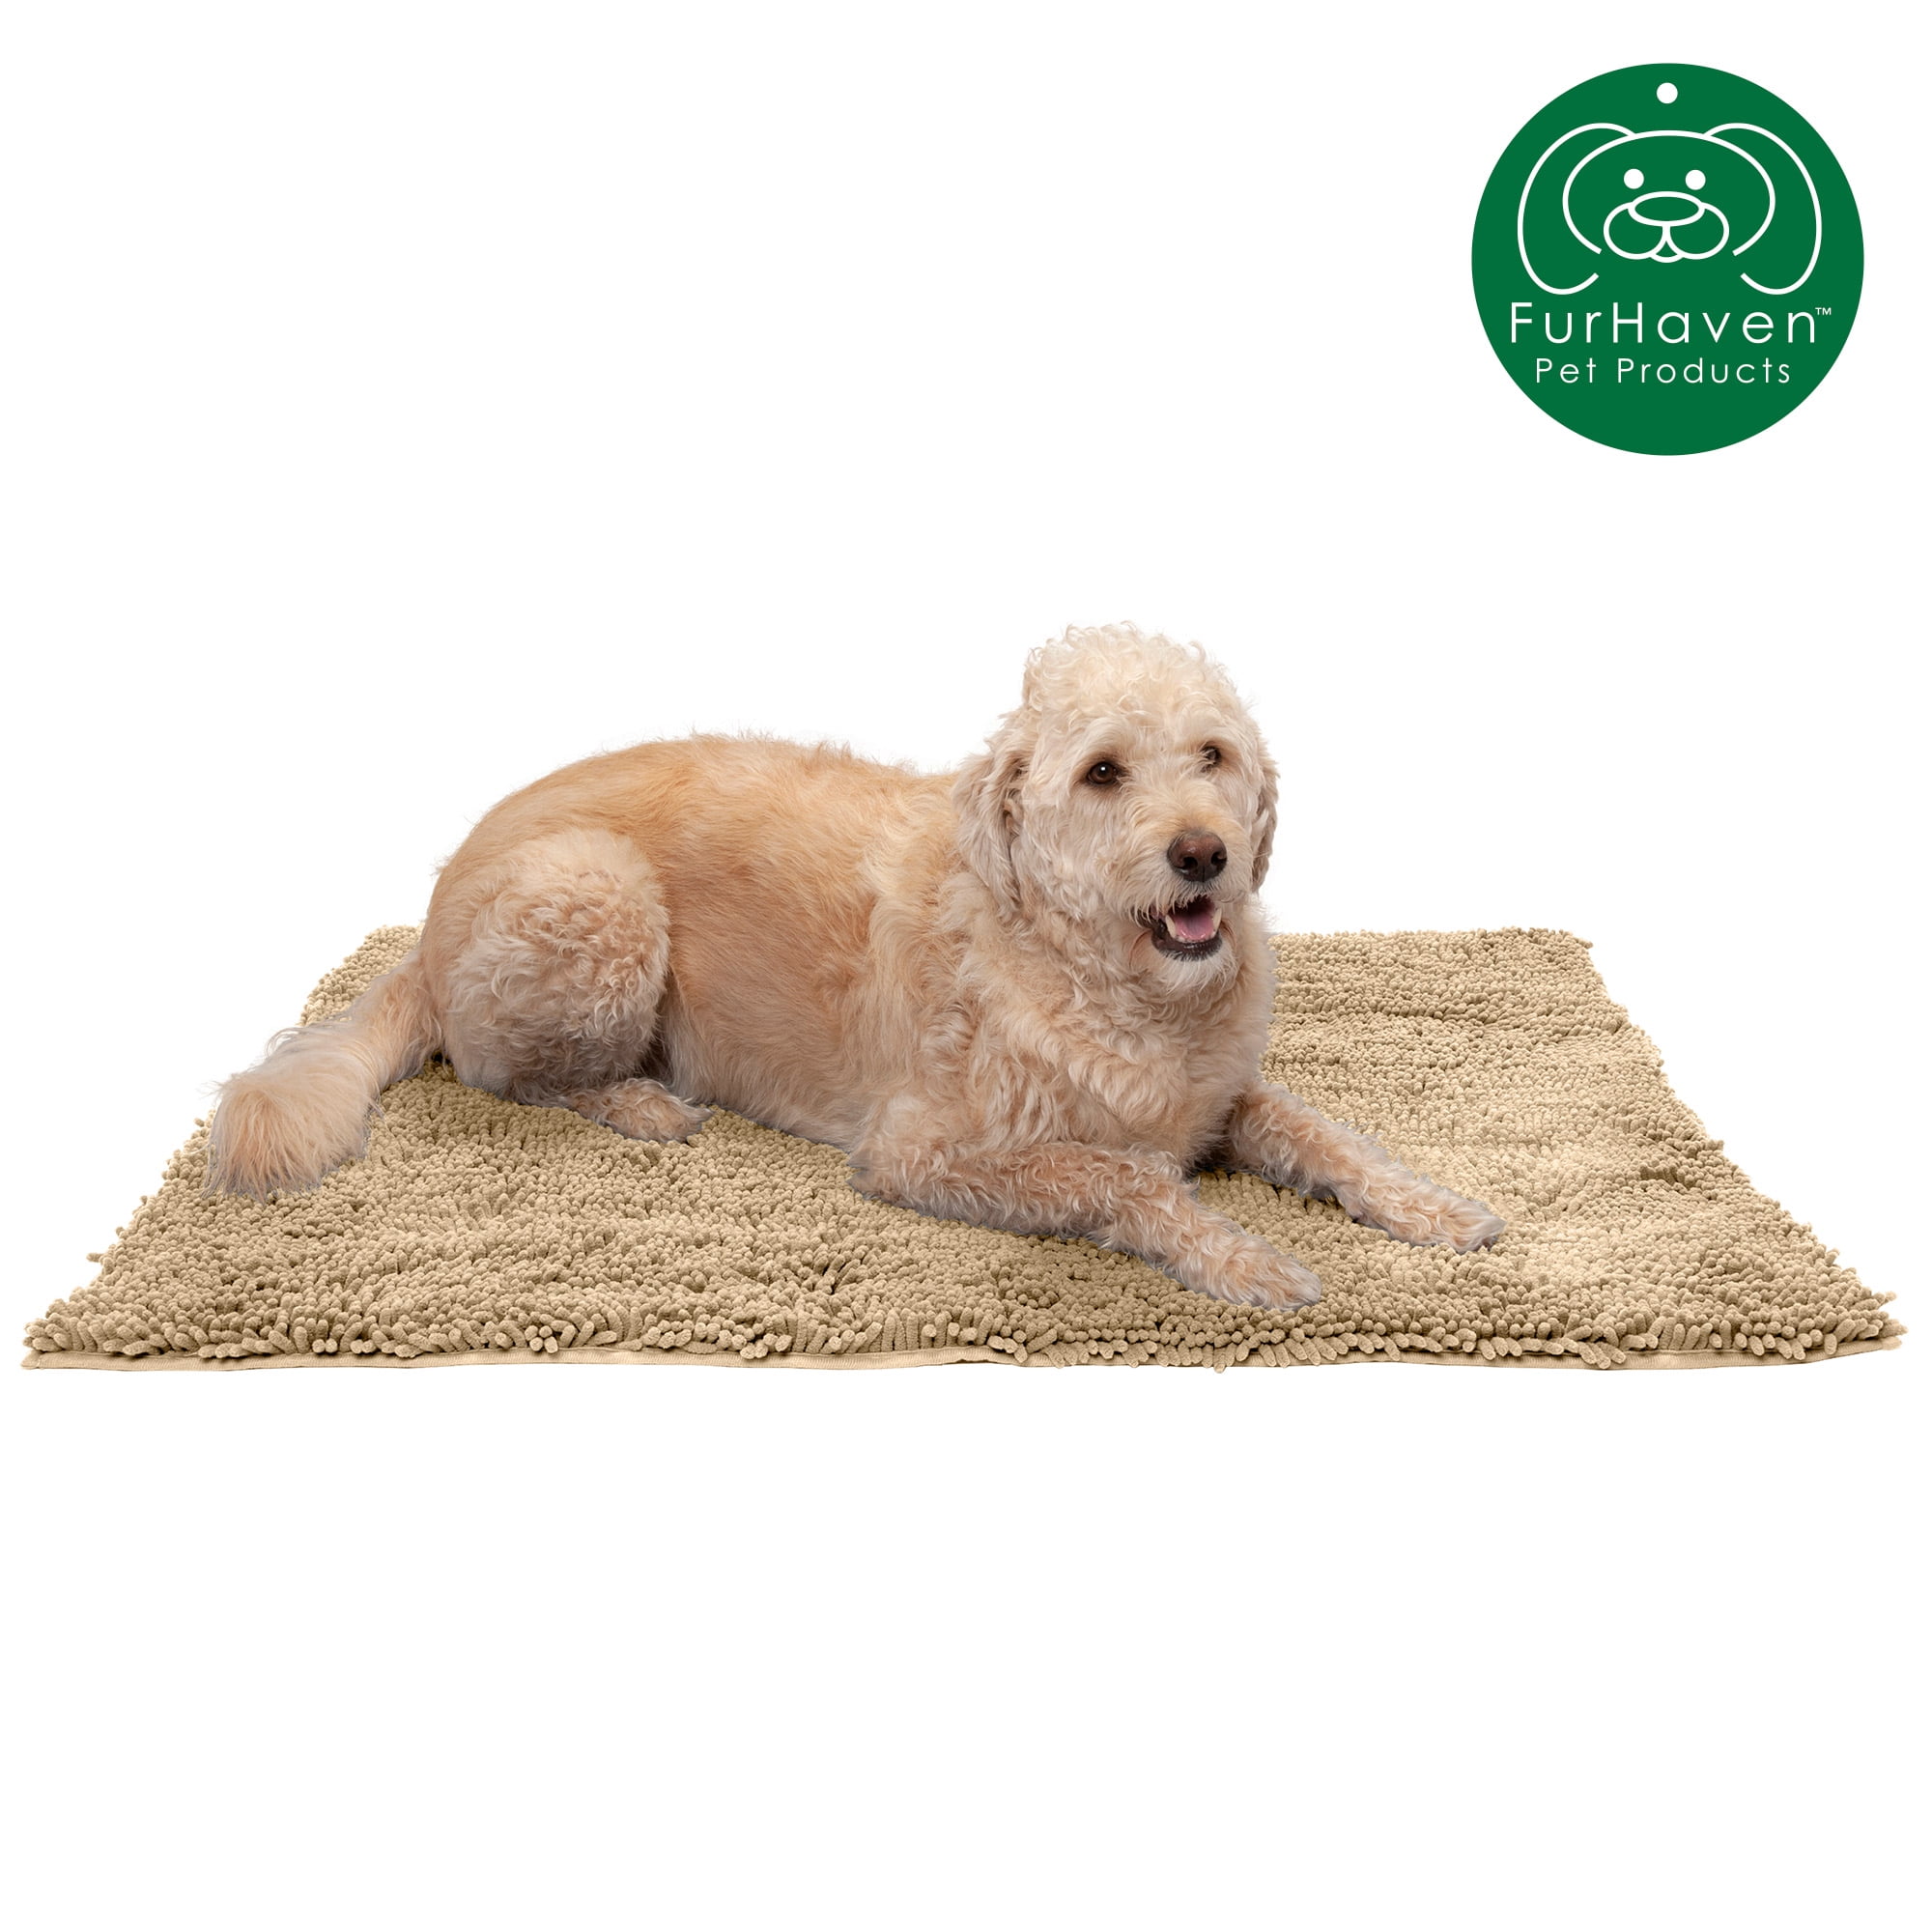 Up To 66% Off on FurHaven Absorbent Shammy Pet